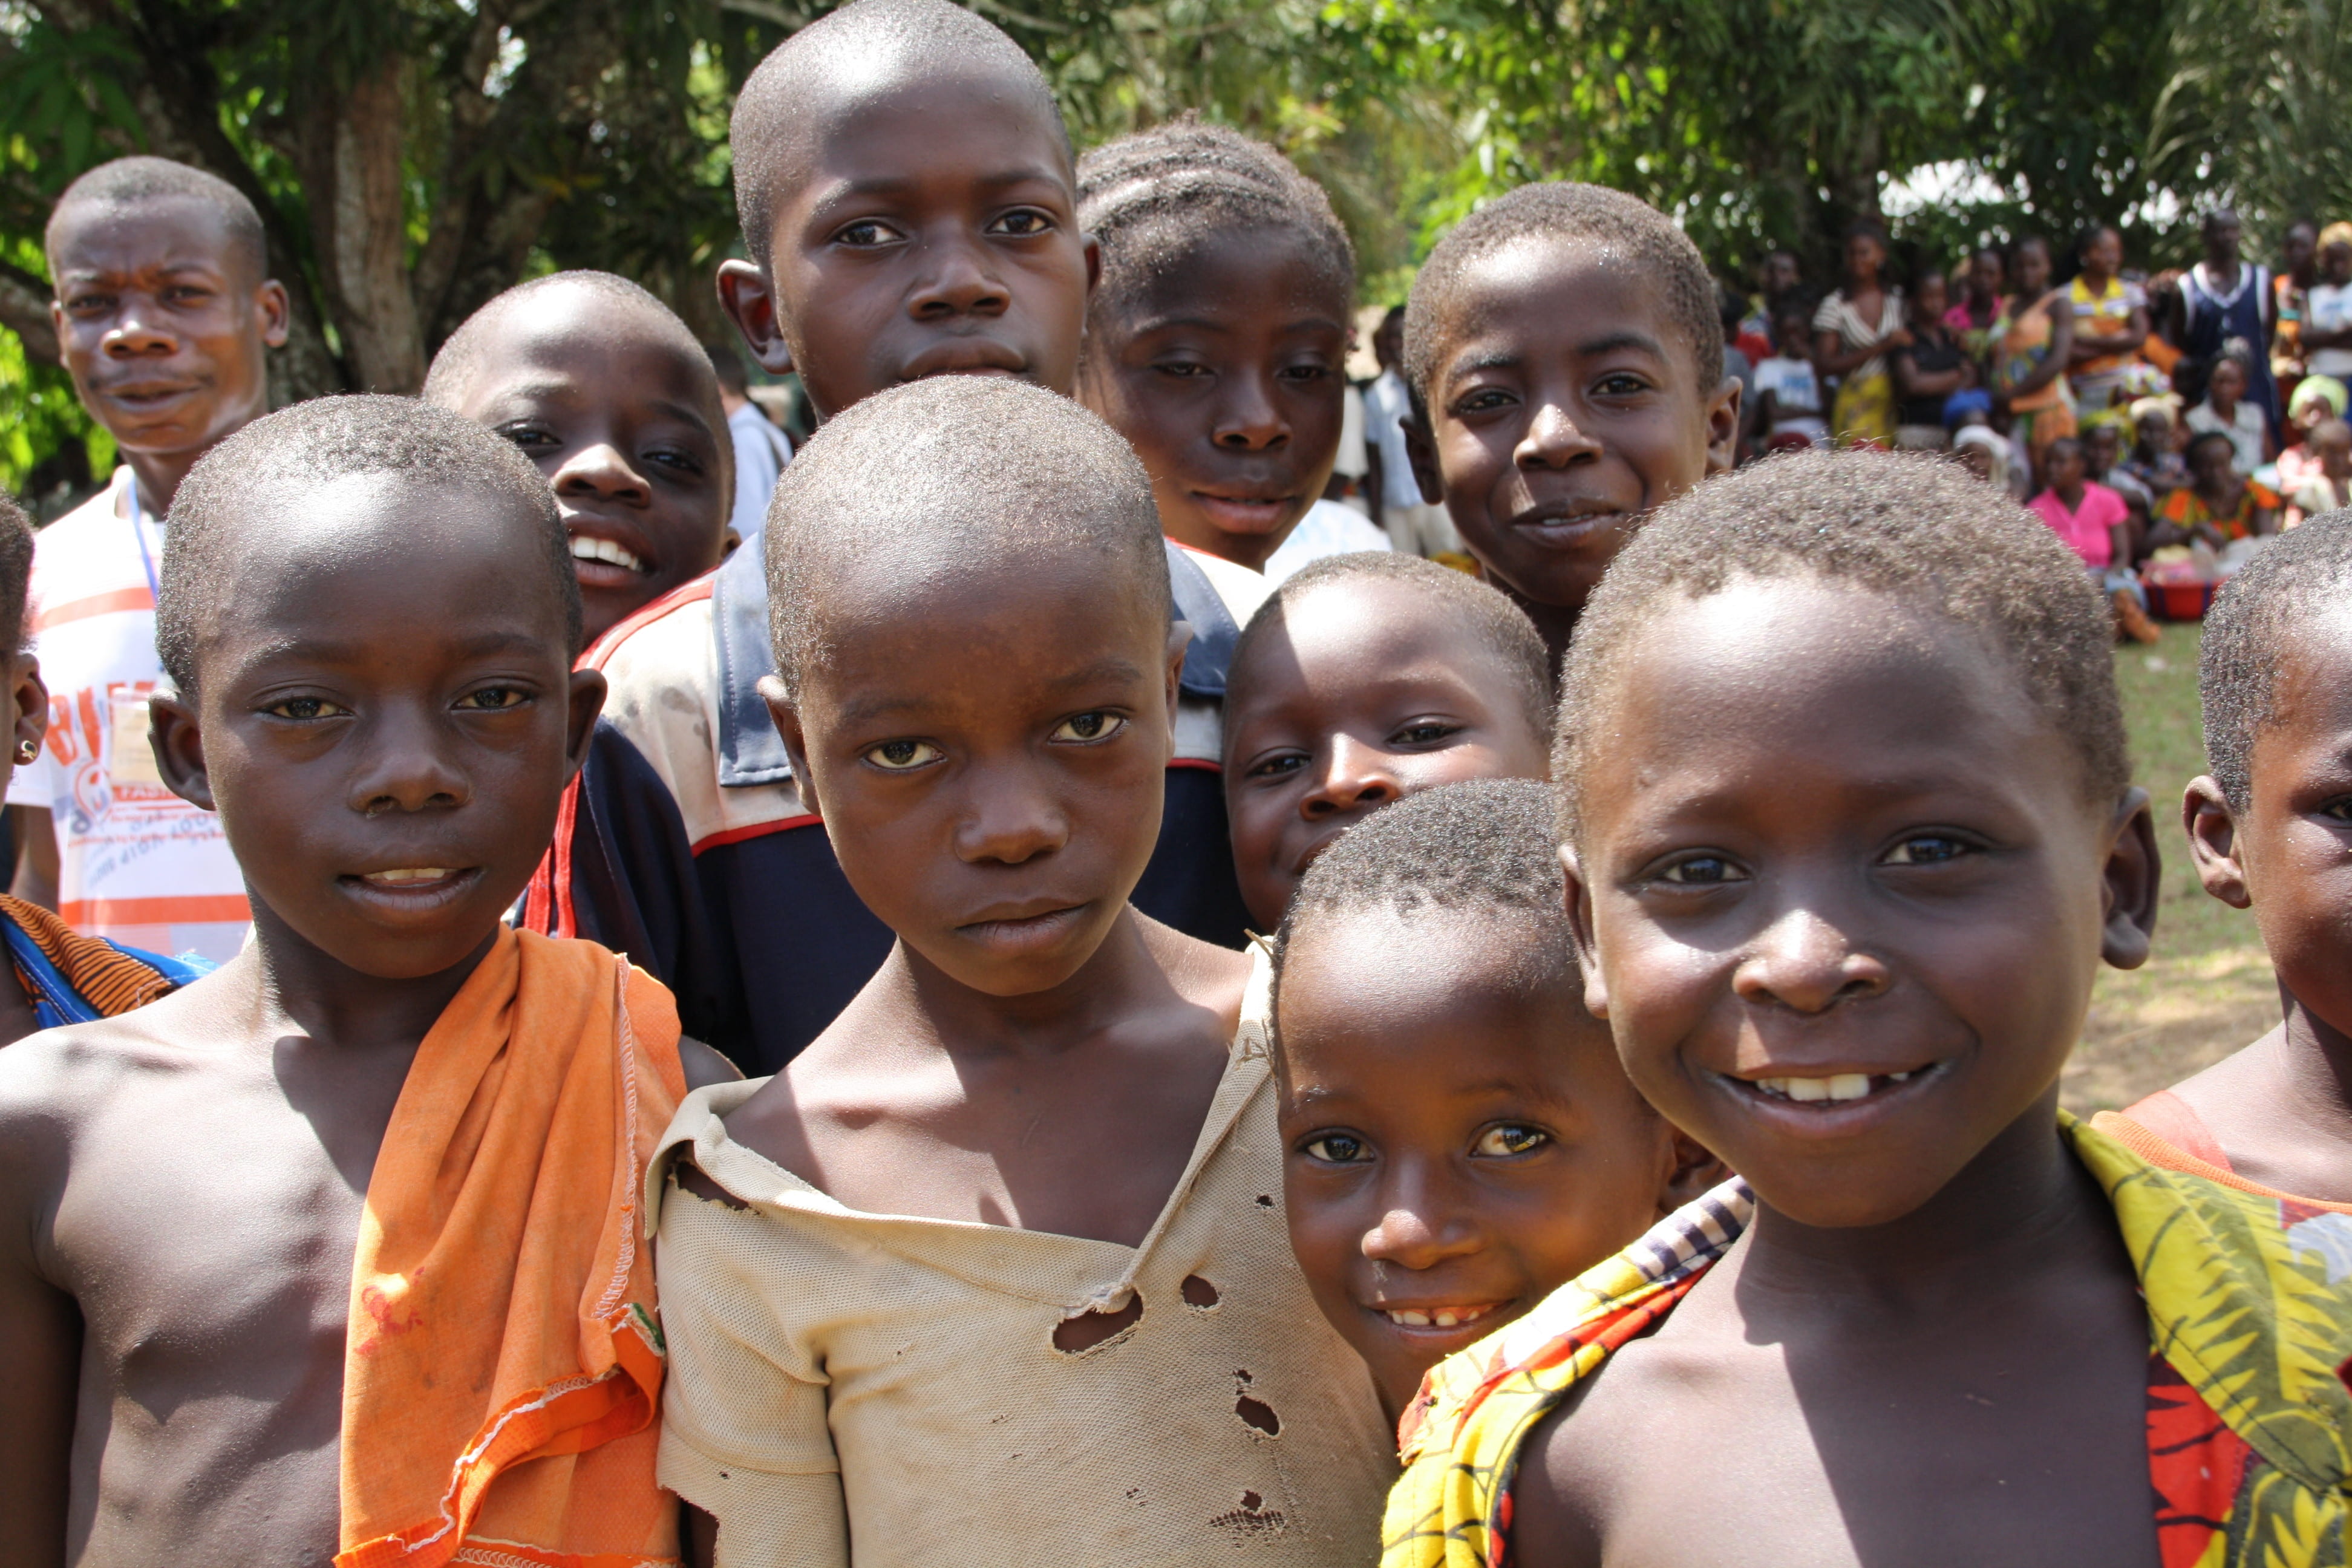 Children pictured at a UNCHR food distribution point in Liberia in 2011. Source: DFID, Creative Commons